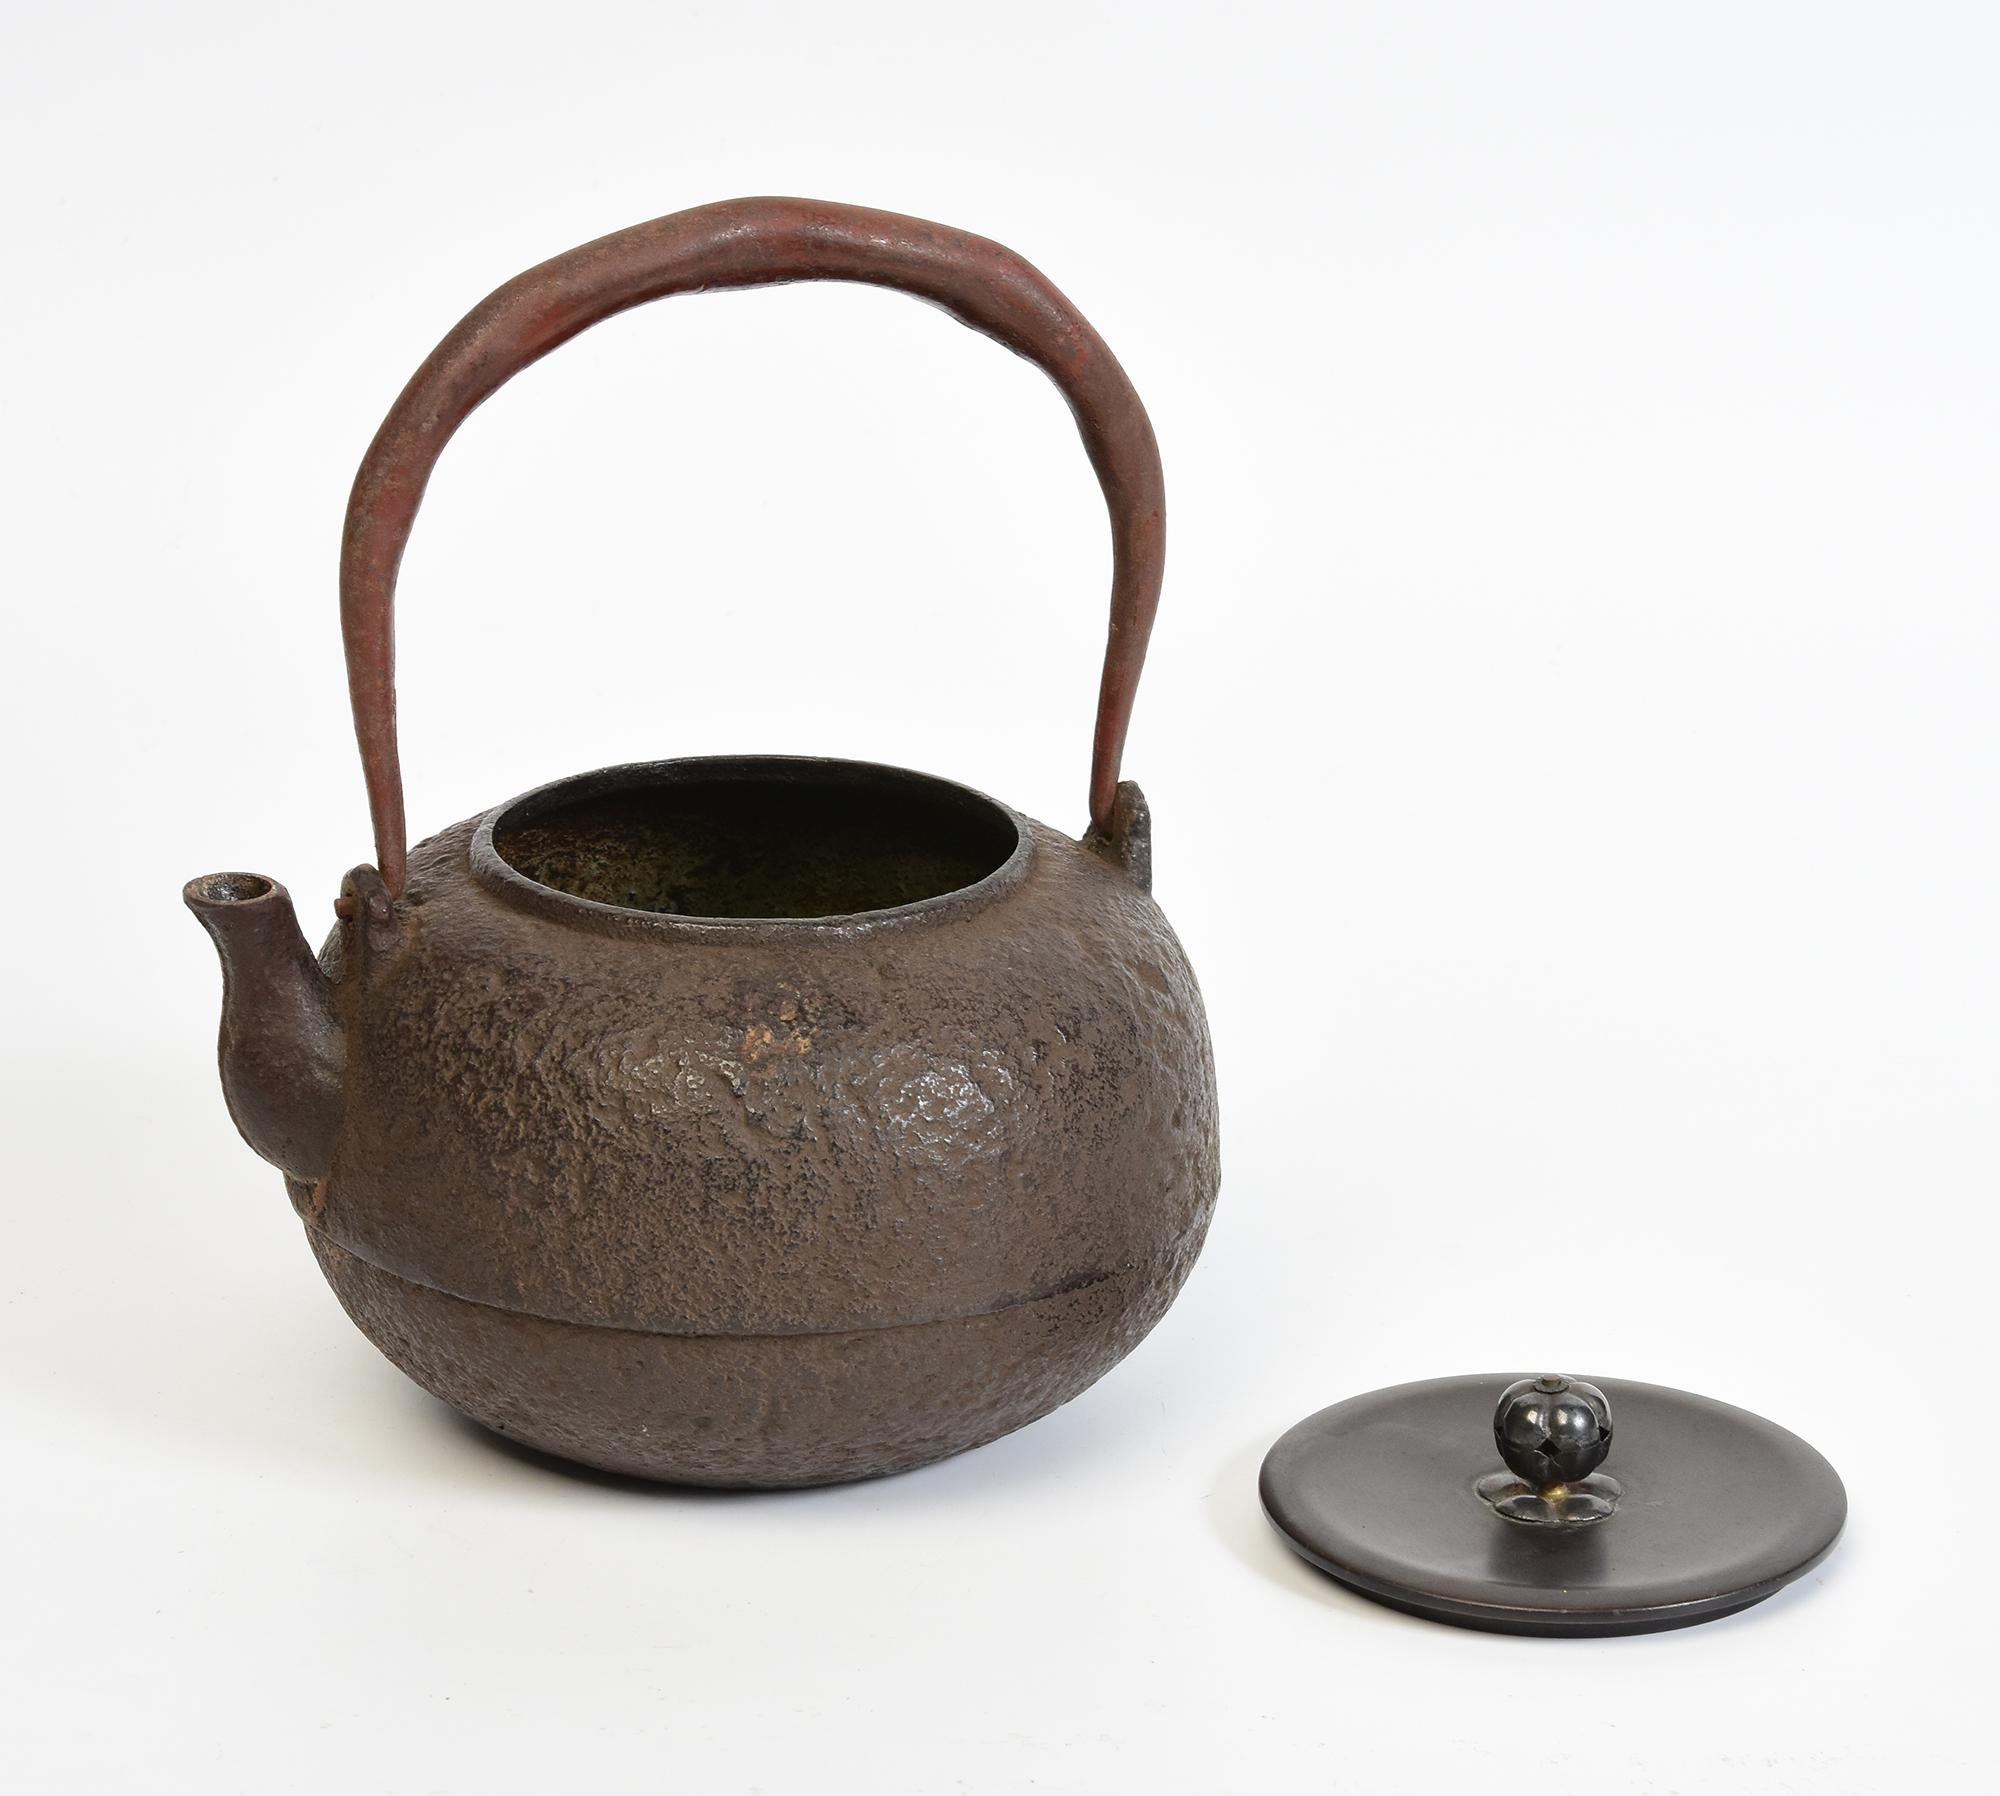 Antique Japanese iron teapot with bronze lid.

Age: Japan, Meiji Period, 19th Century
Size: Height 19.8 C.M. / Width 17.3 C.M. / Diameter 15.5
Condition: Nice condition overall. 

100% satisfaction and authenticity guaranteed with free 